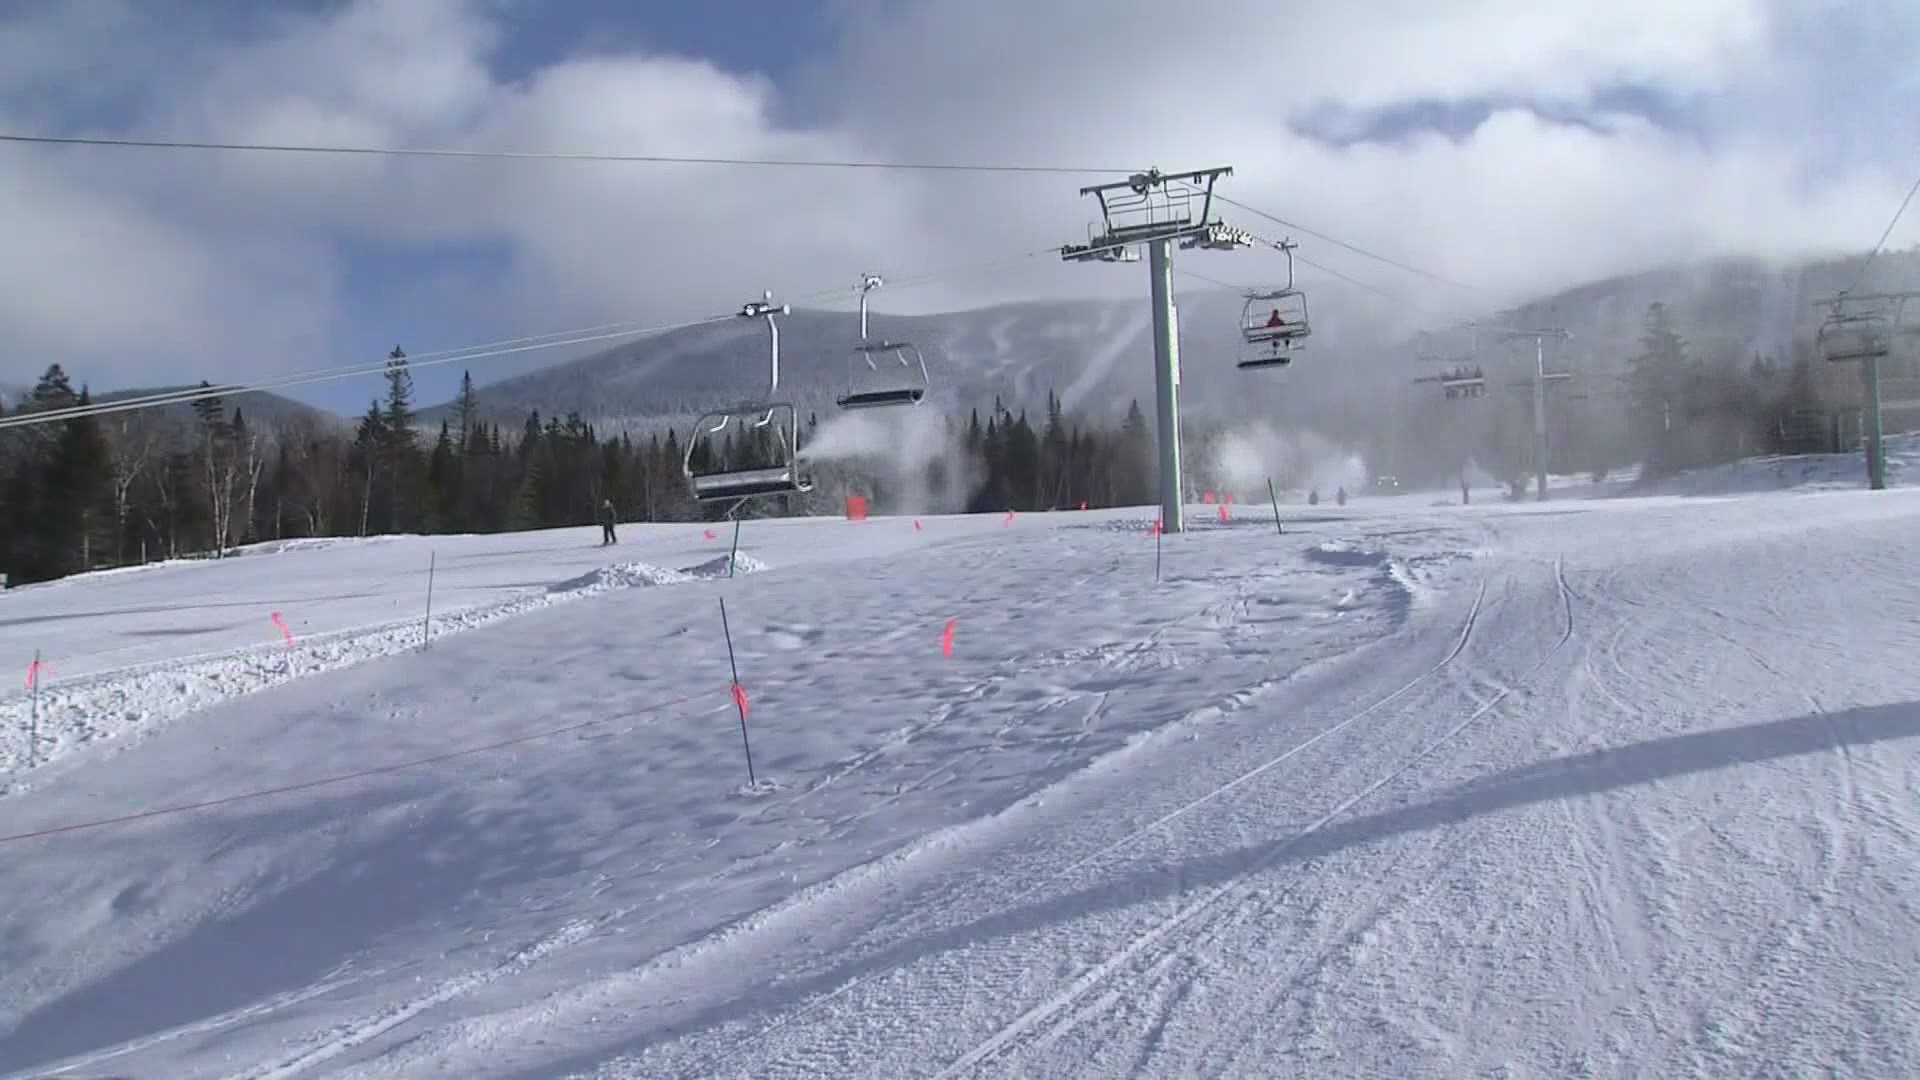 Saddleback Ski Area reopened after five years and skiers and snowboarders are already hitting the slopes